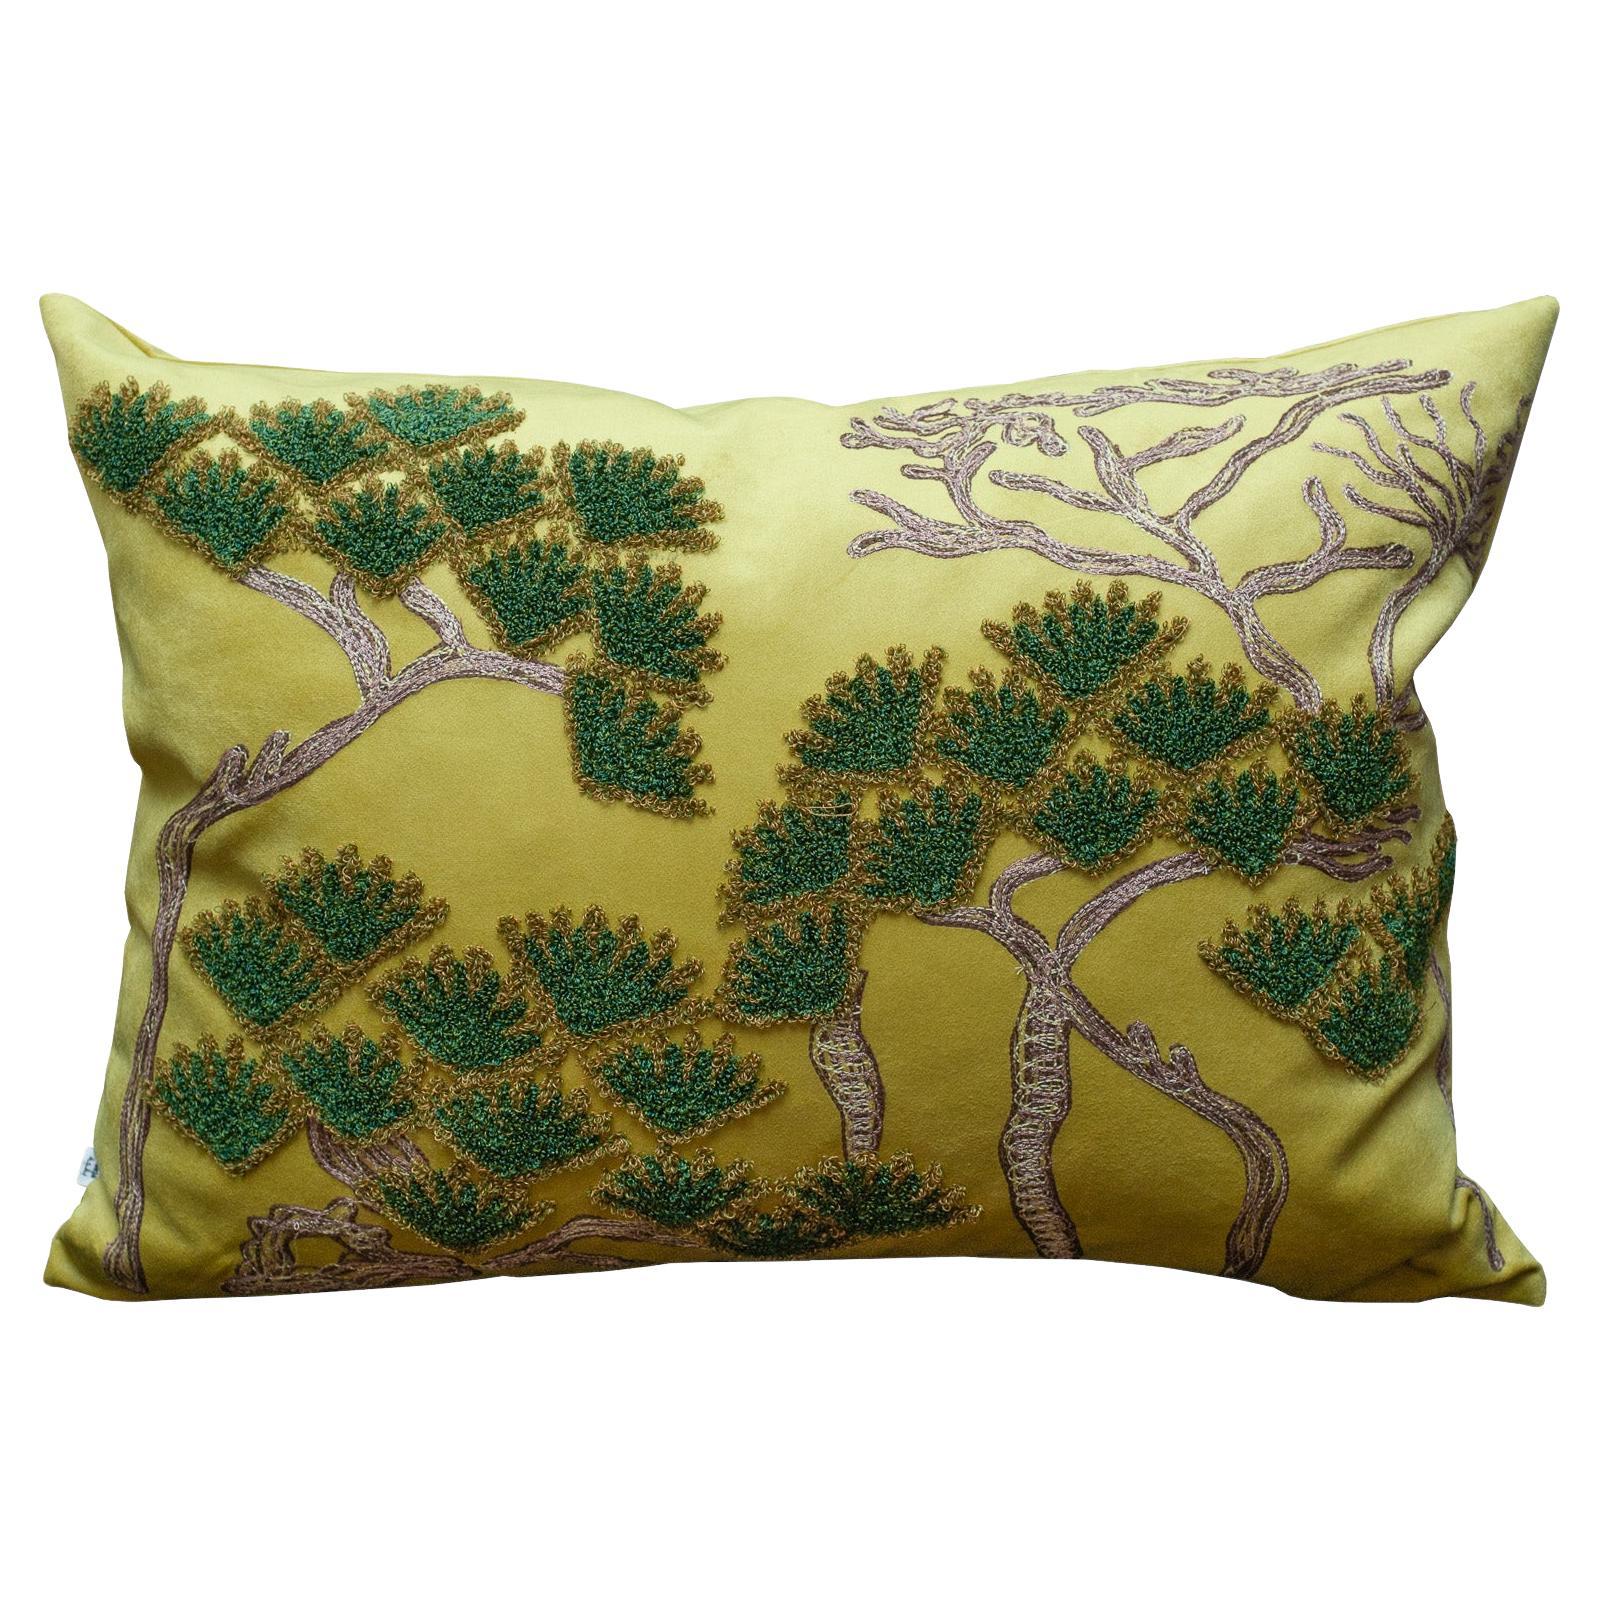 Contemporary Embroidered Pillow on Yellow Green Ultrasuede with Pine Trees